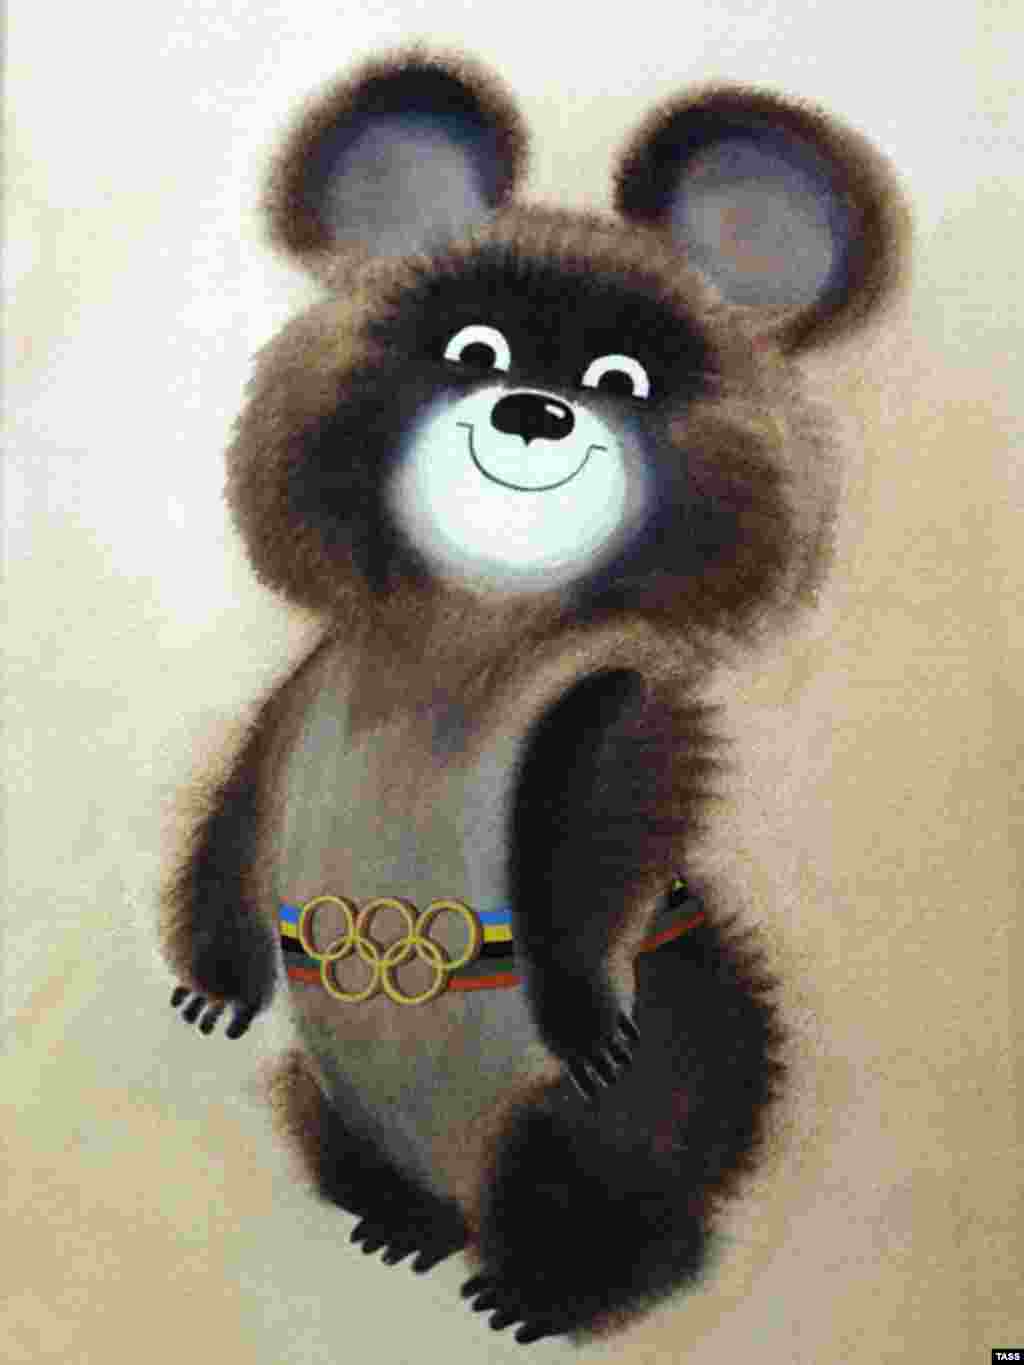 Misha was designed by illustrator Victor Chizhikov - Even Misha the Bear, the mascot of the 1980 Moscow Olympics, might ride the wave of Soviet nostalgia. Olympic planners are considering reviving Misha as the symbol of the 2014 Winter Games in the Russian resort of Sochi.